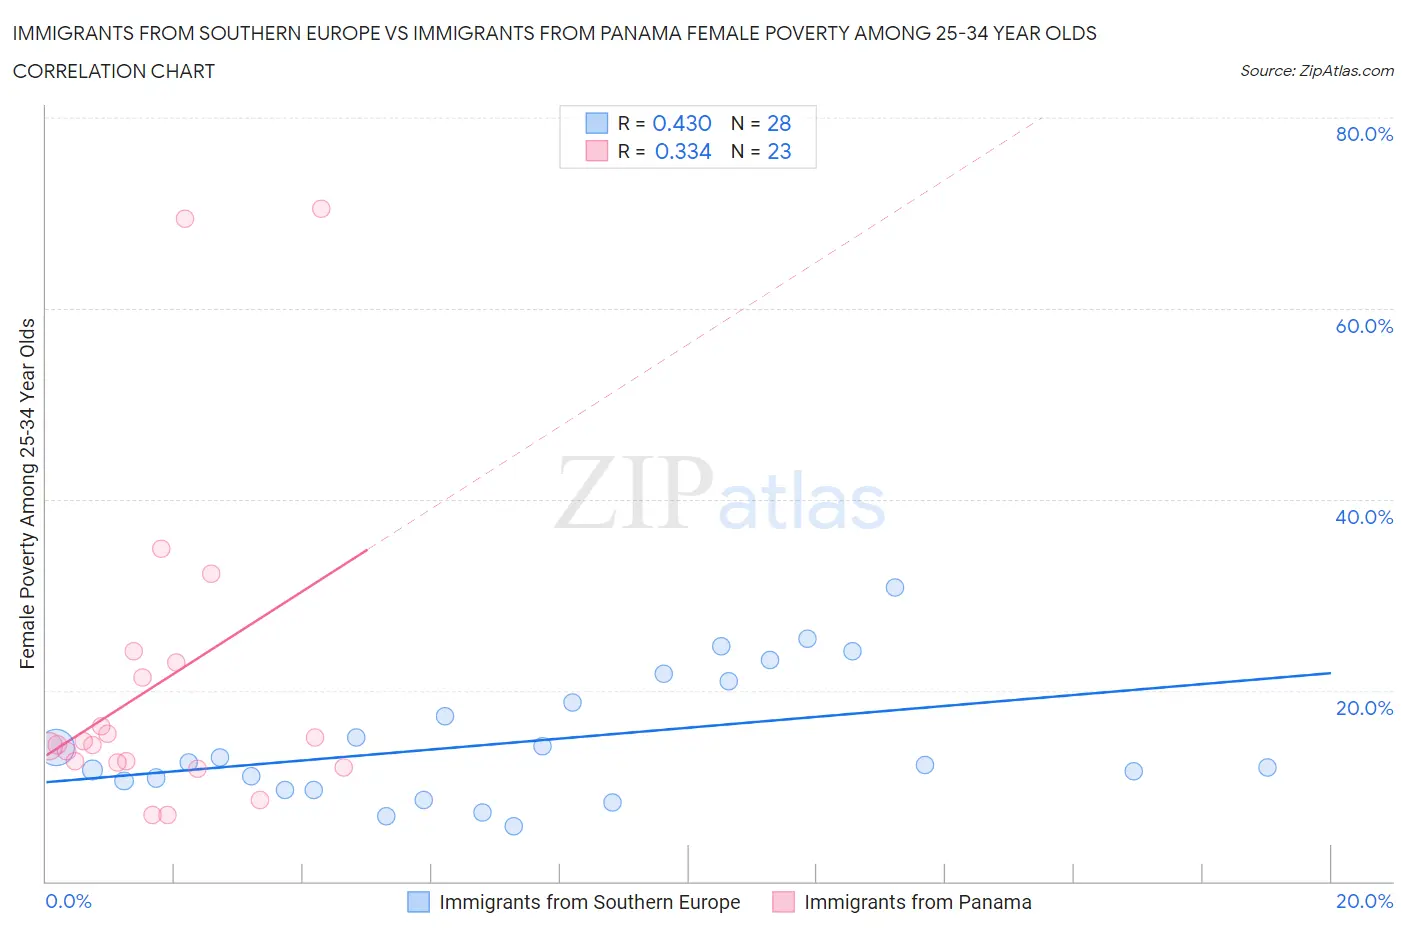 Immigrants from Southern Europe vs Immigrants from Panama Female Poverty Among 25-34 Year Olds